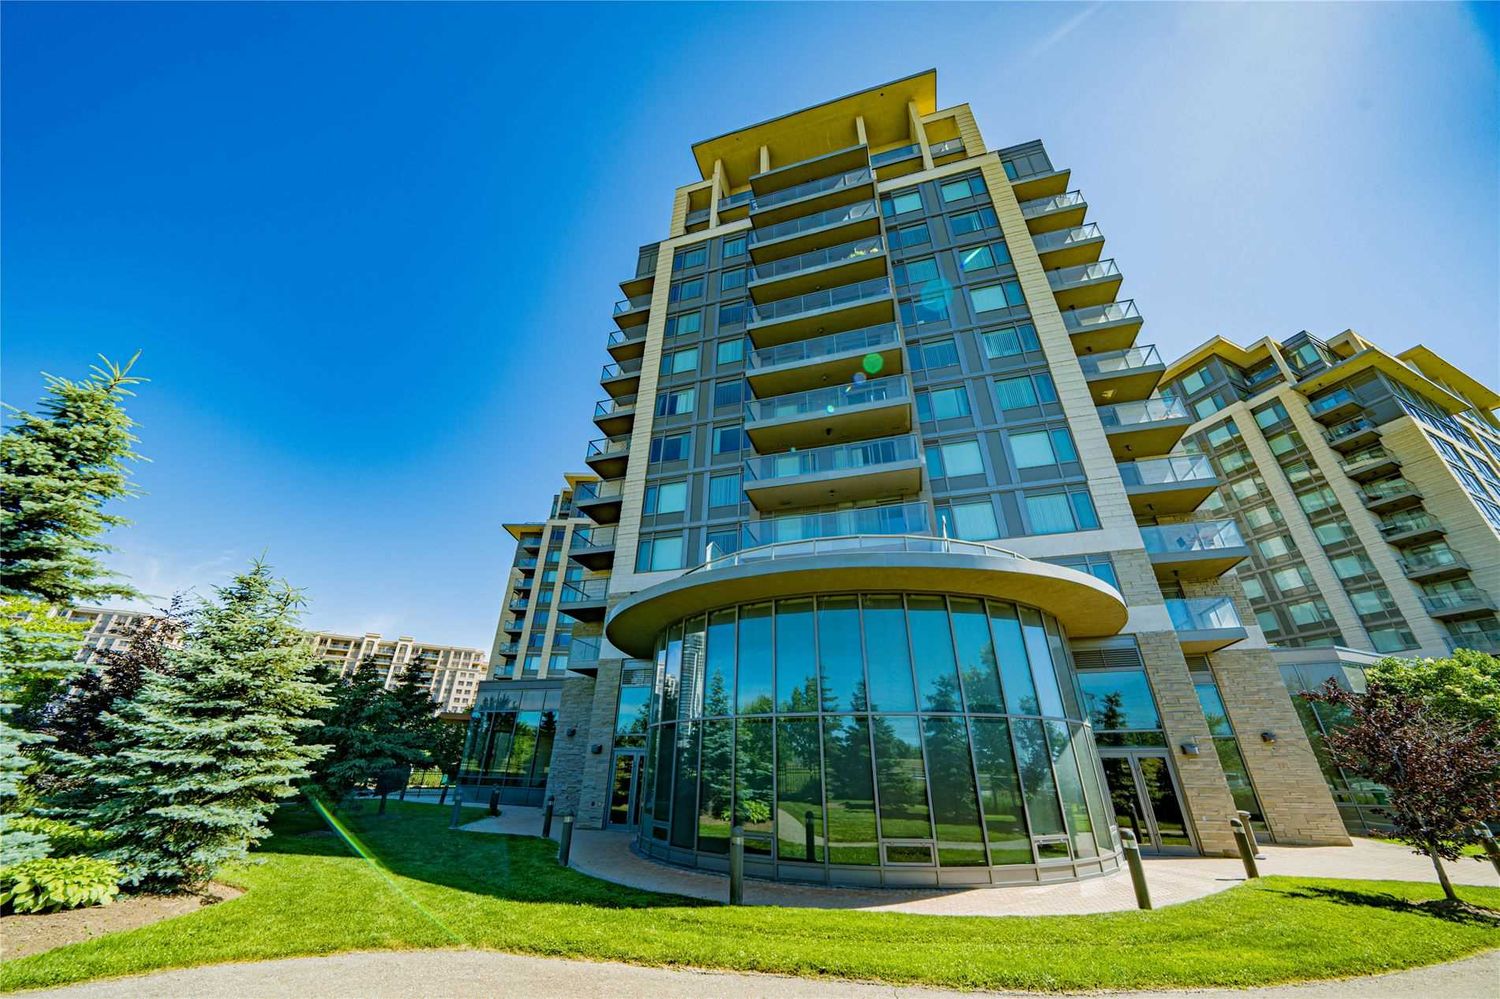 215-273 South Park Road. Eden Park Towers Condos is located in  Markham, Toronto - image #3 of 3